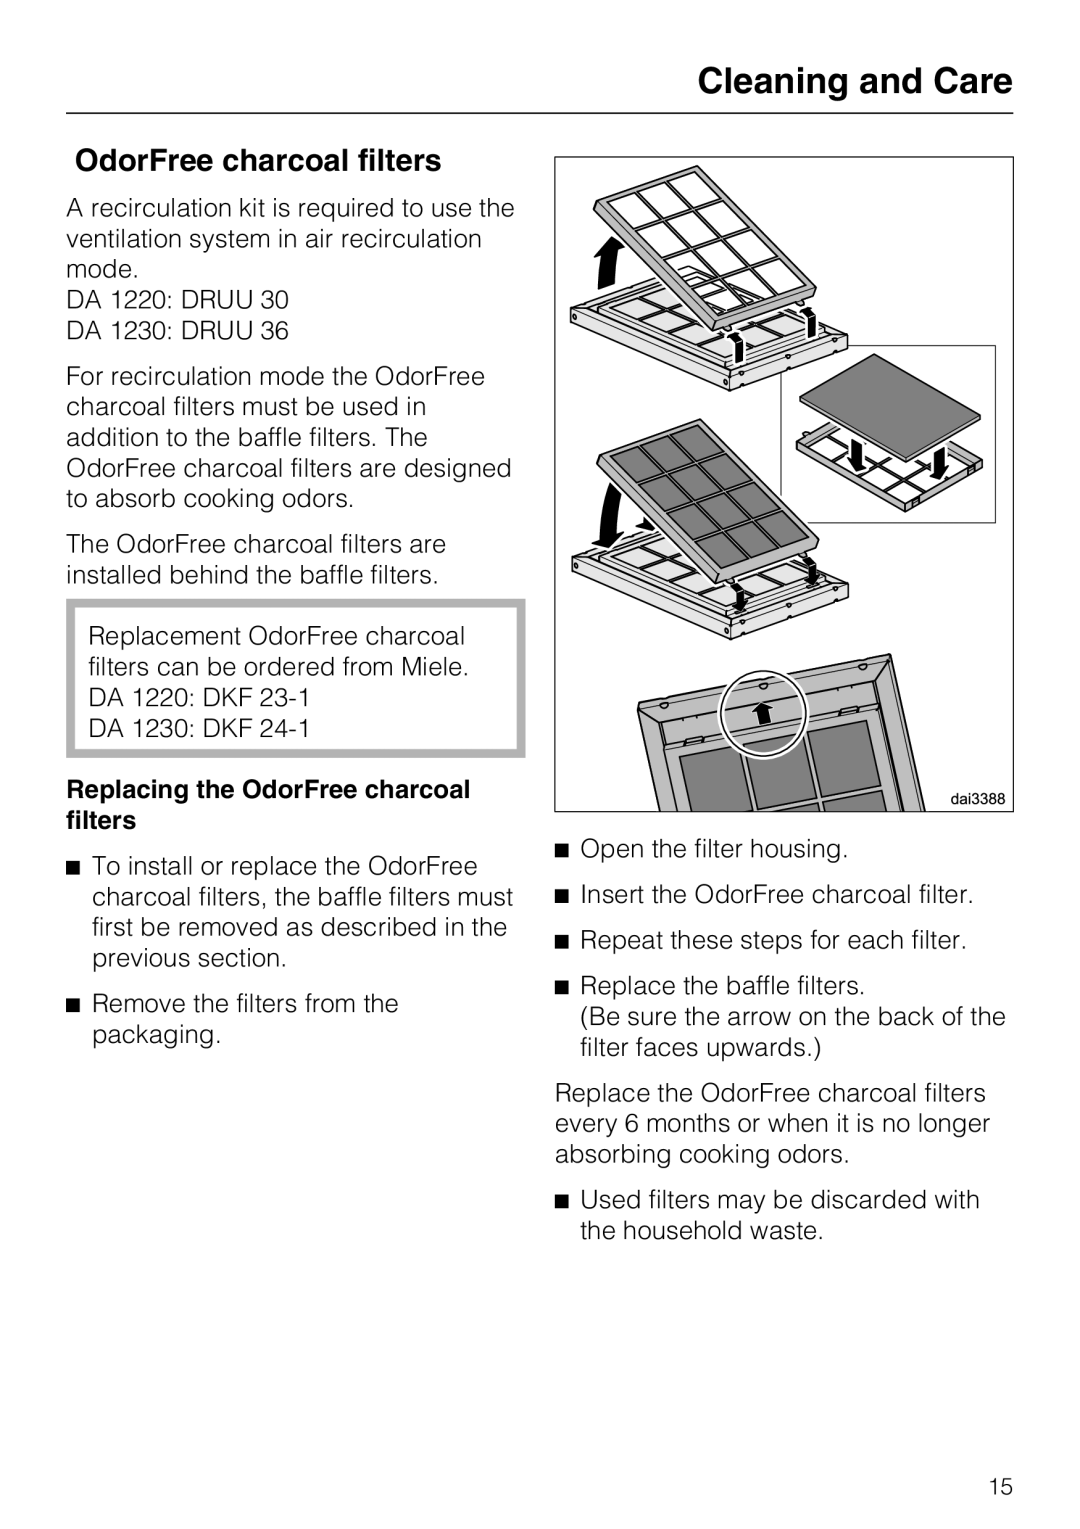 Miele 09 824 260 installation instructions Cleaning and Care, Replacing the OdorFree charcoal filters 